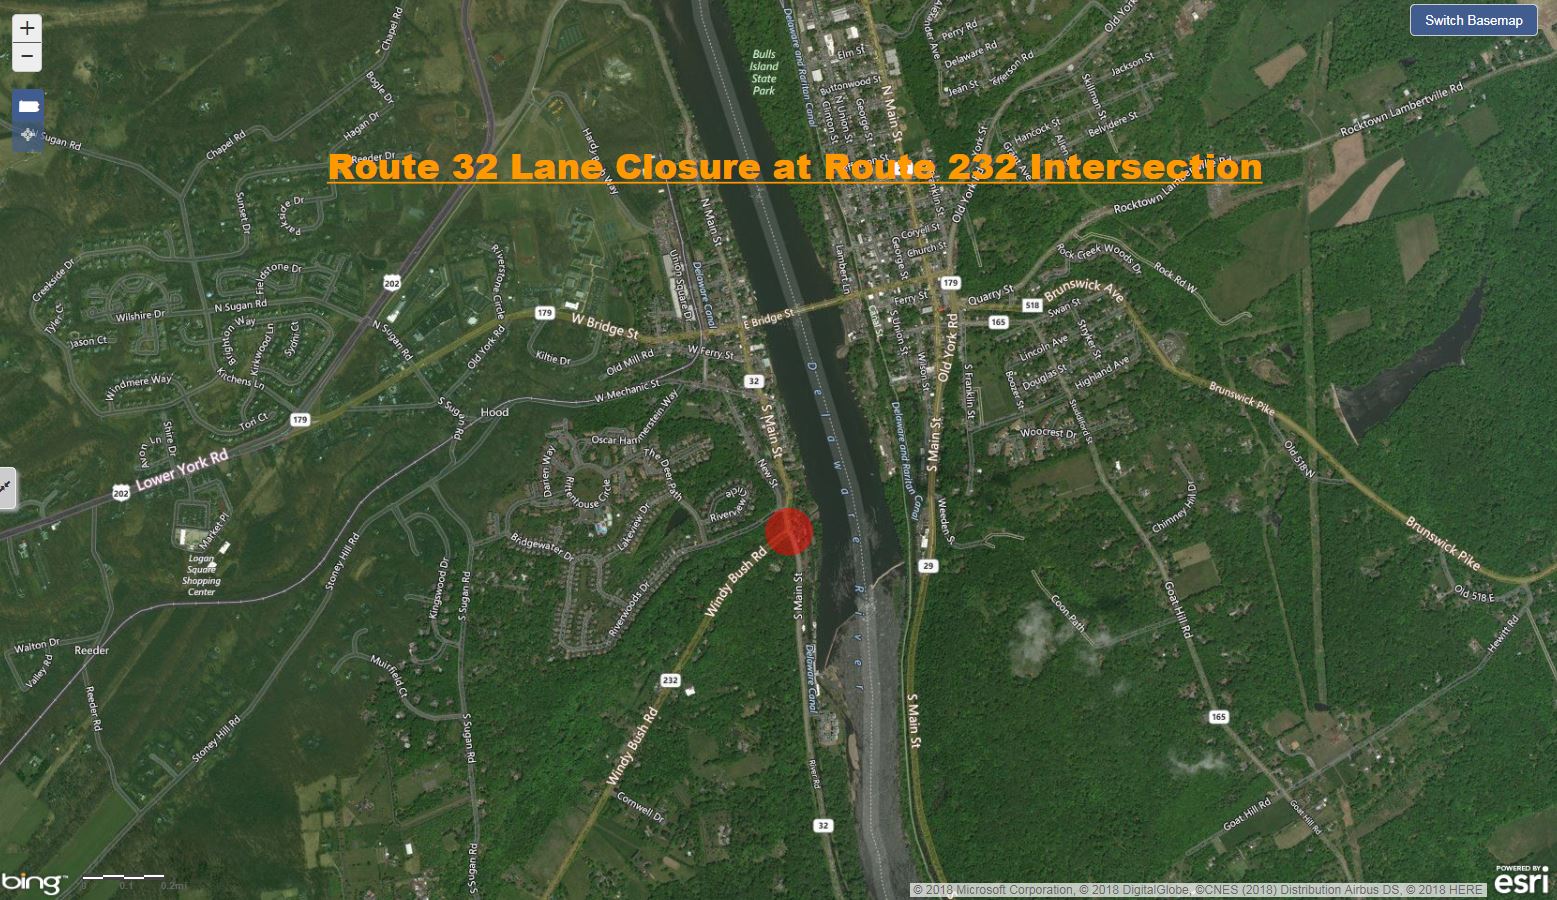 Route 32 Lane Closure at Route 232 Intersection Bucks County.JPG